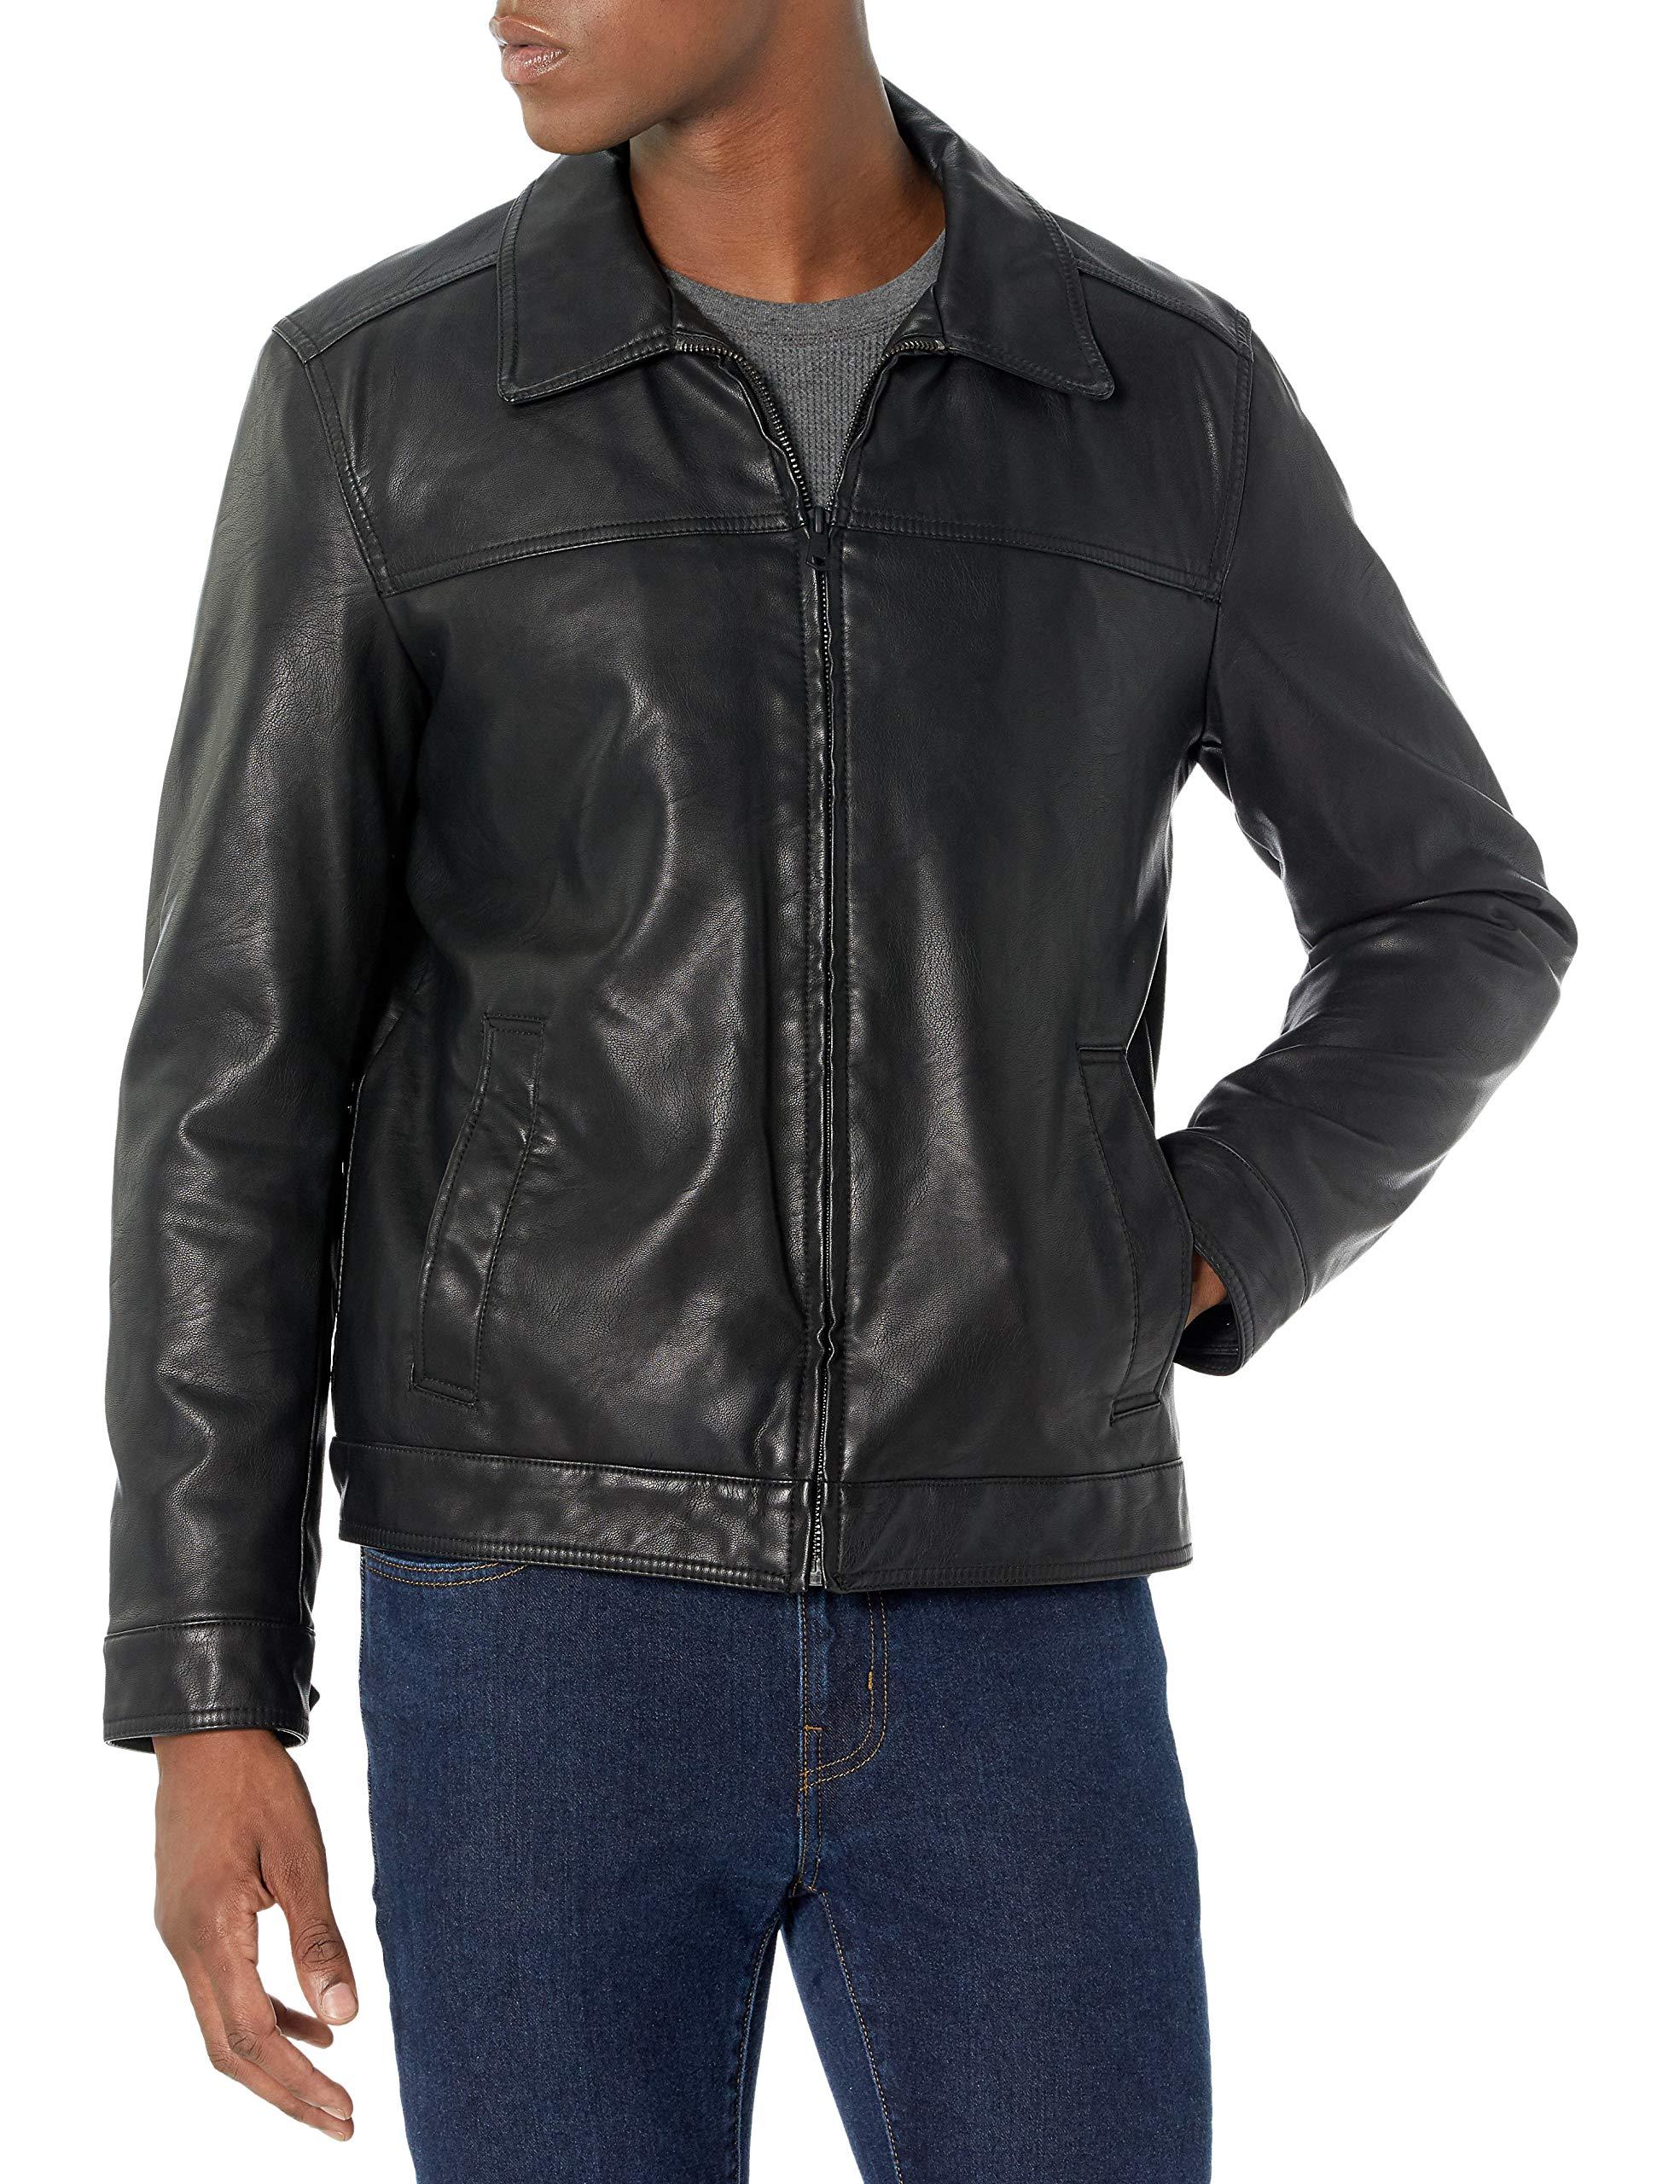 Tommy Hilfiger Mens Classic Faux Leather Jacket in Black for Men - Lyst